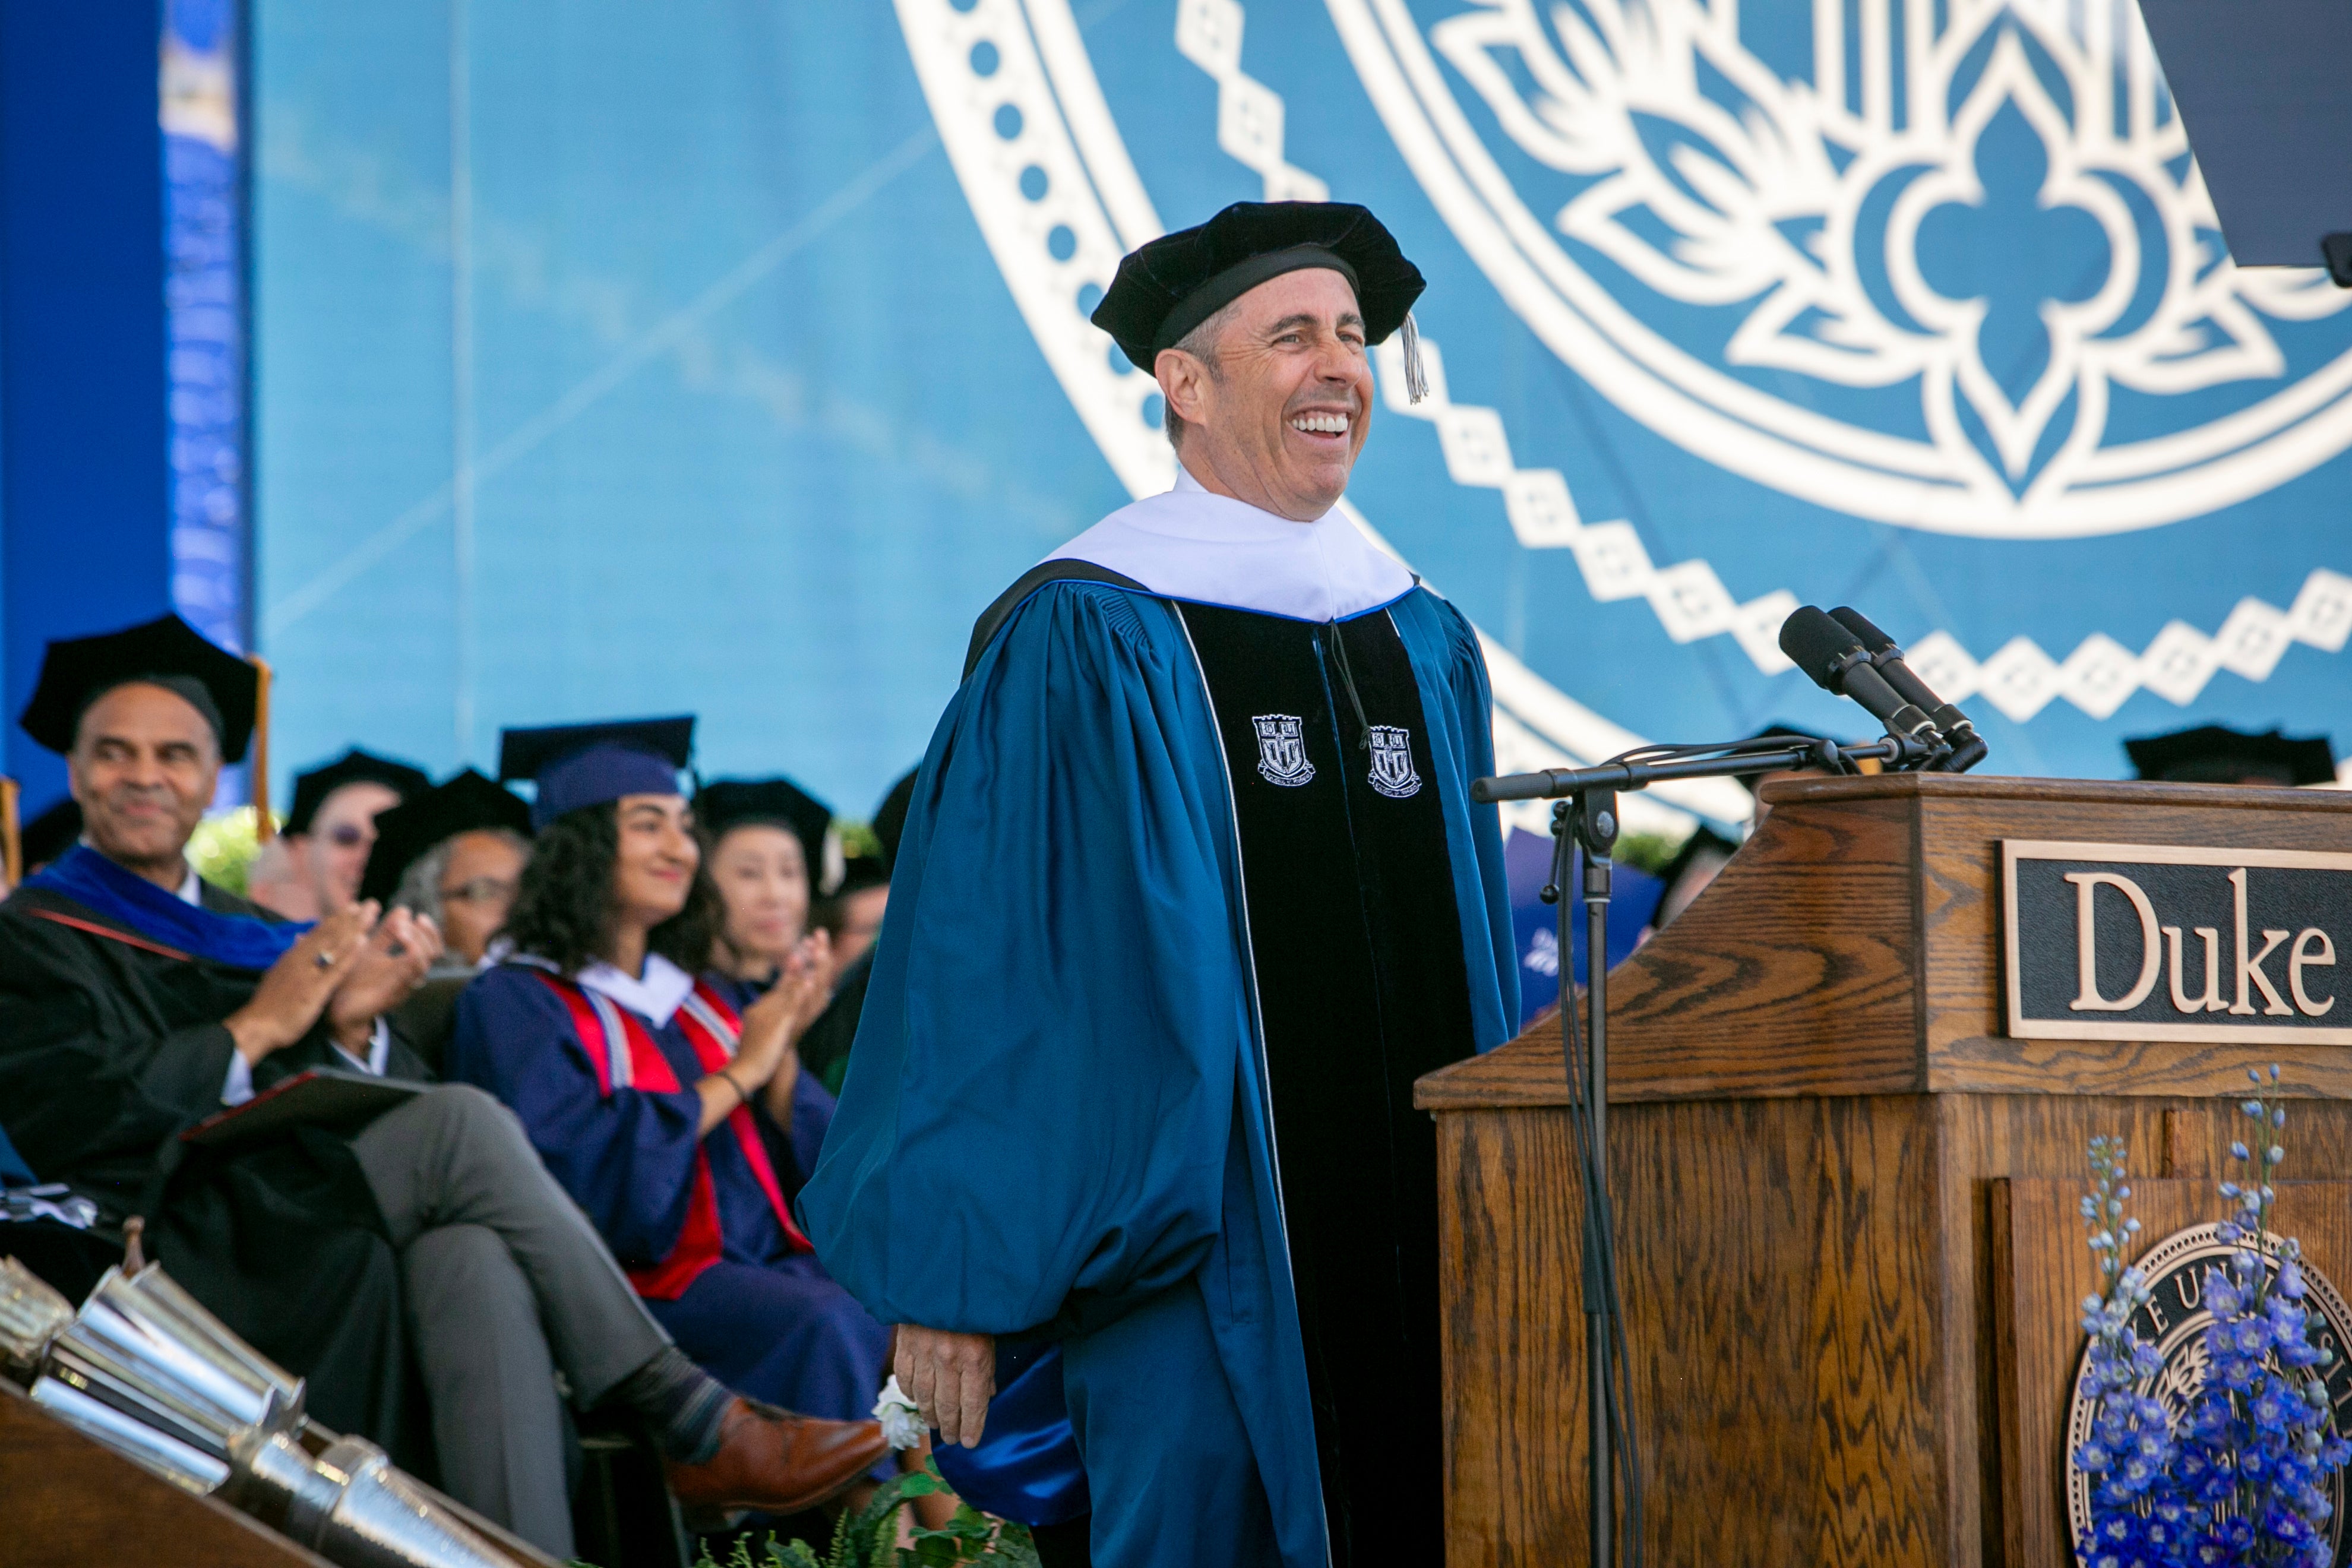 Jerry Seinfeld spoke at the Duke University graduation ceremony last week. Gaza protesters walked out during the ceremony